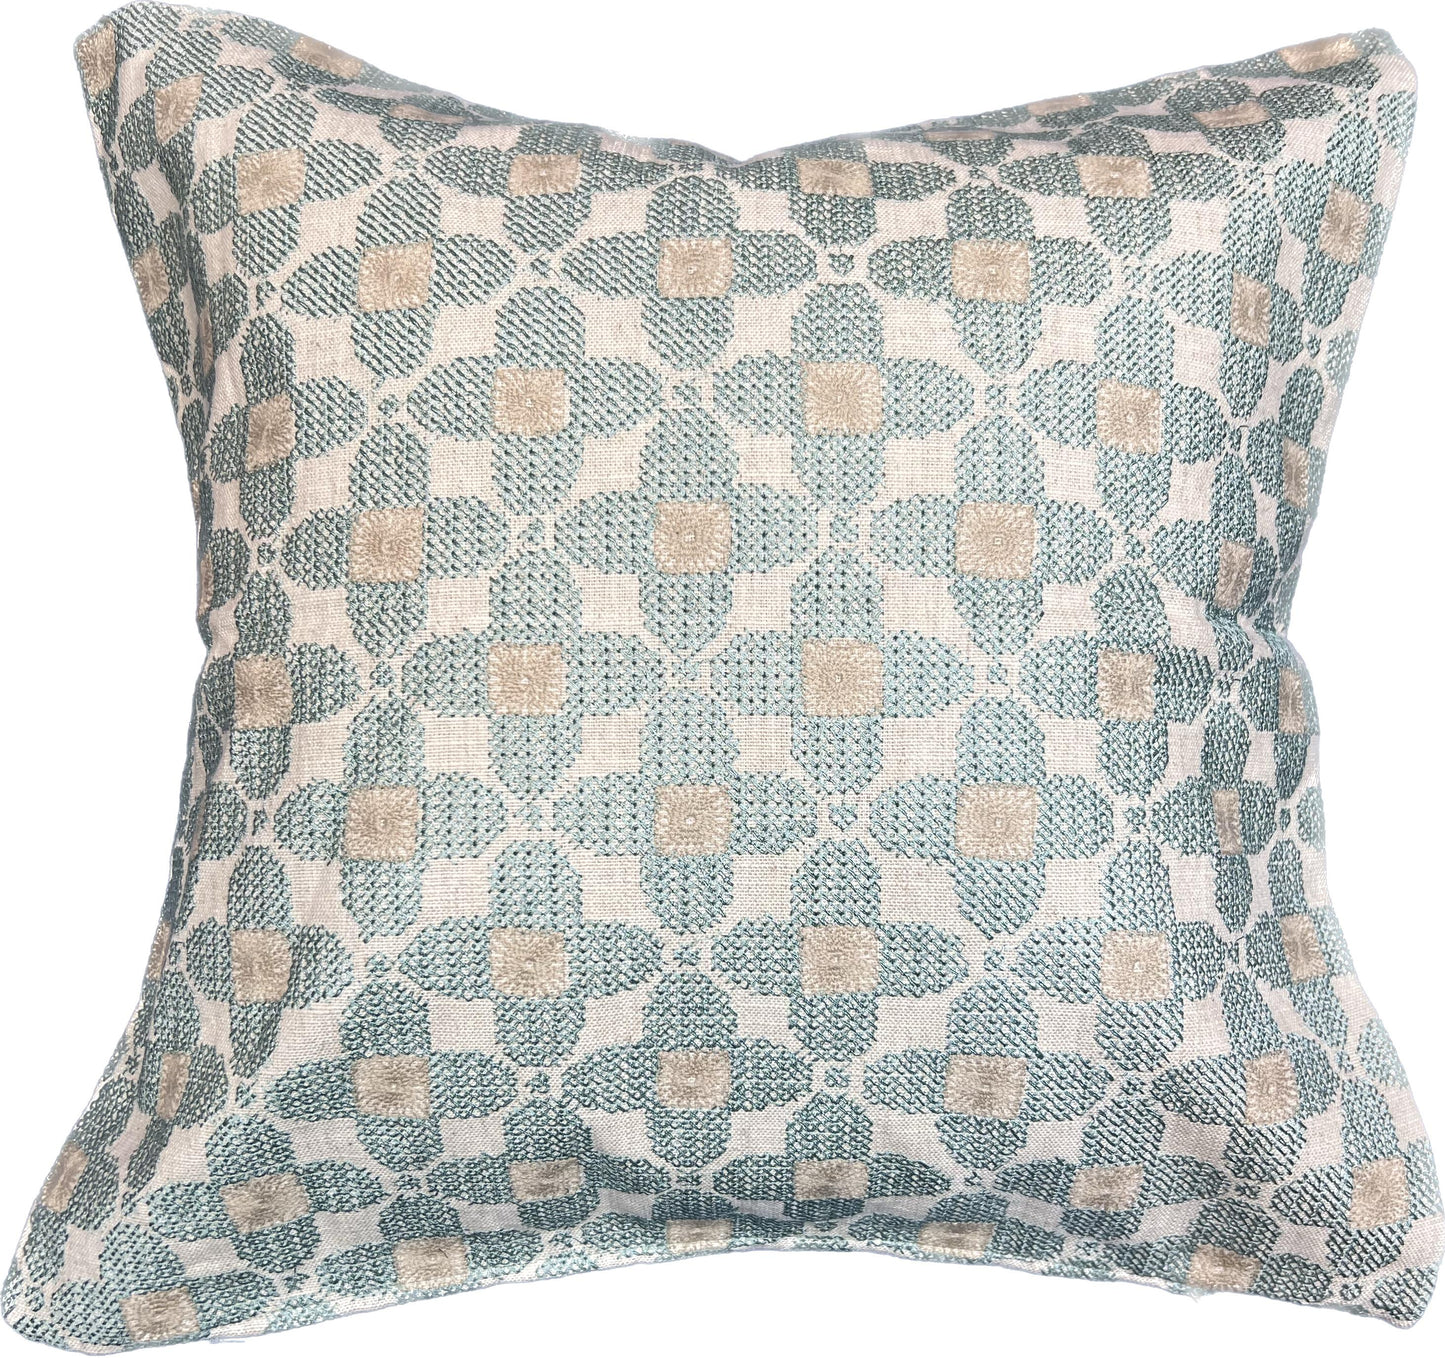 18"x18"  Star Pillow Cover